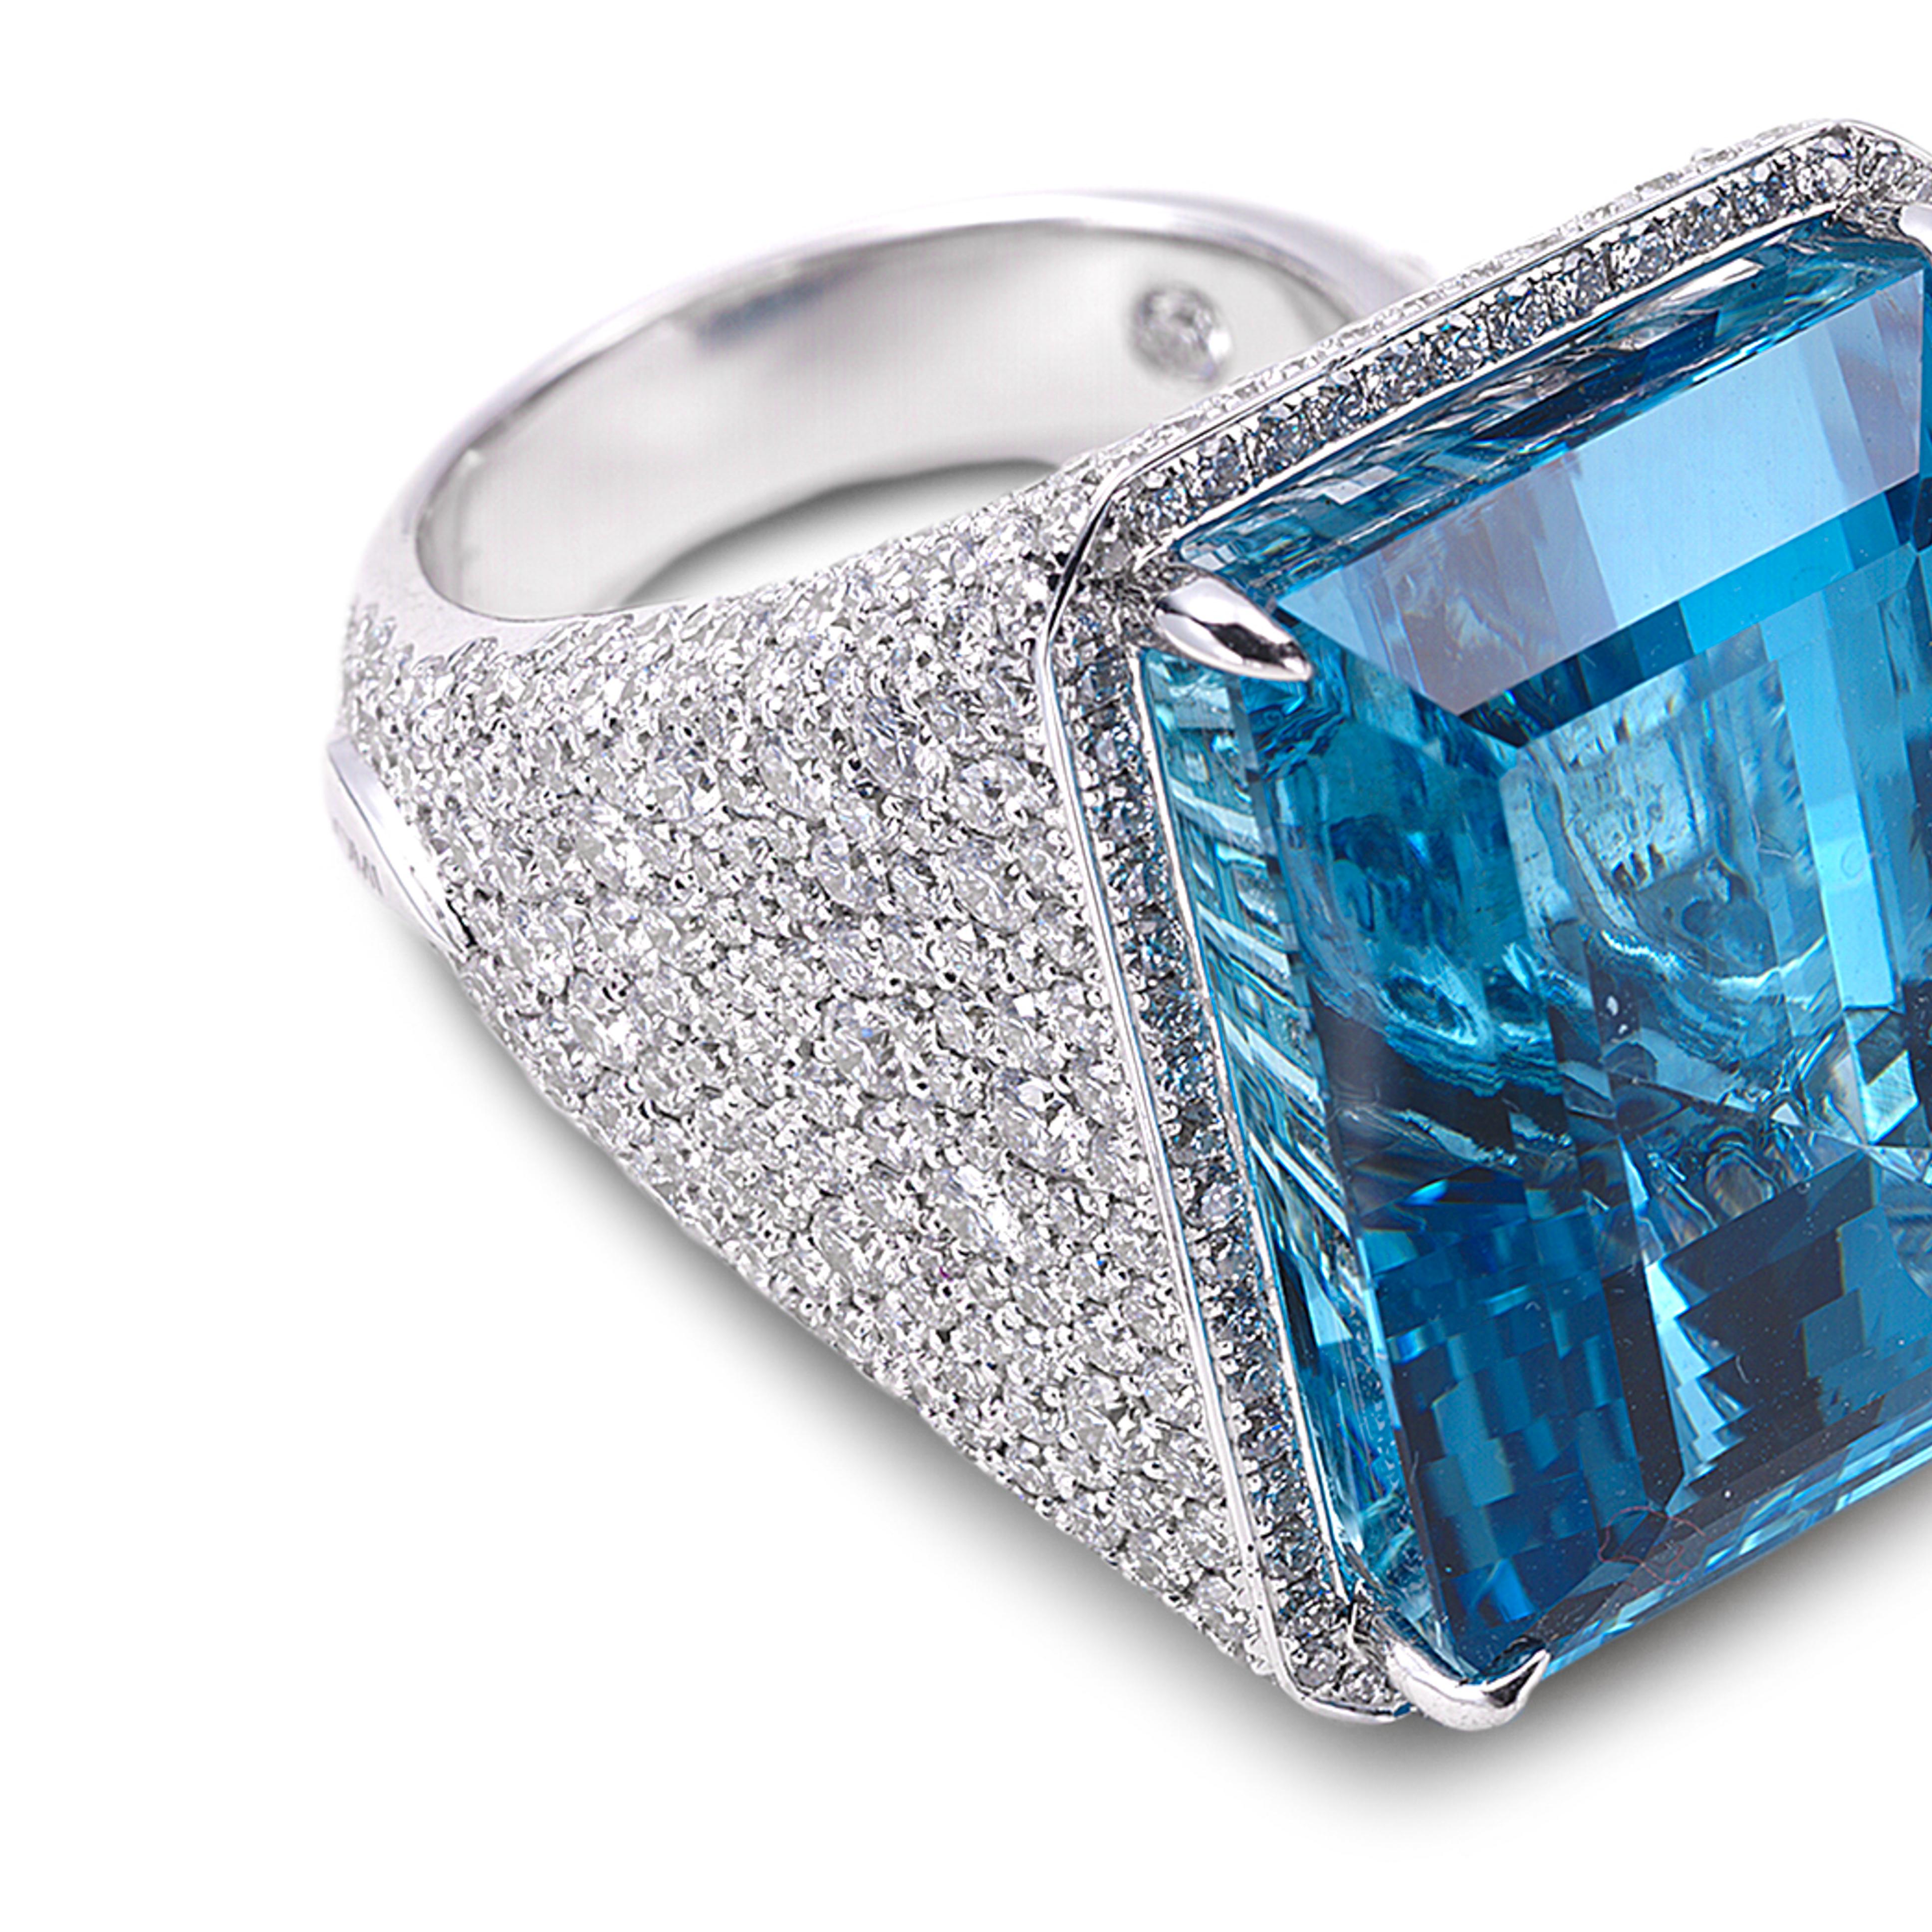 Trinity Ring Size 7 with 45.99CTS of Aquamarine, and 5.52CTS of Diamond. Set in 18K White Gold. 